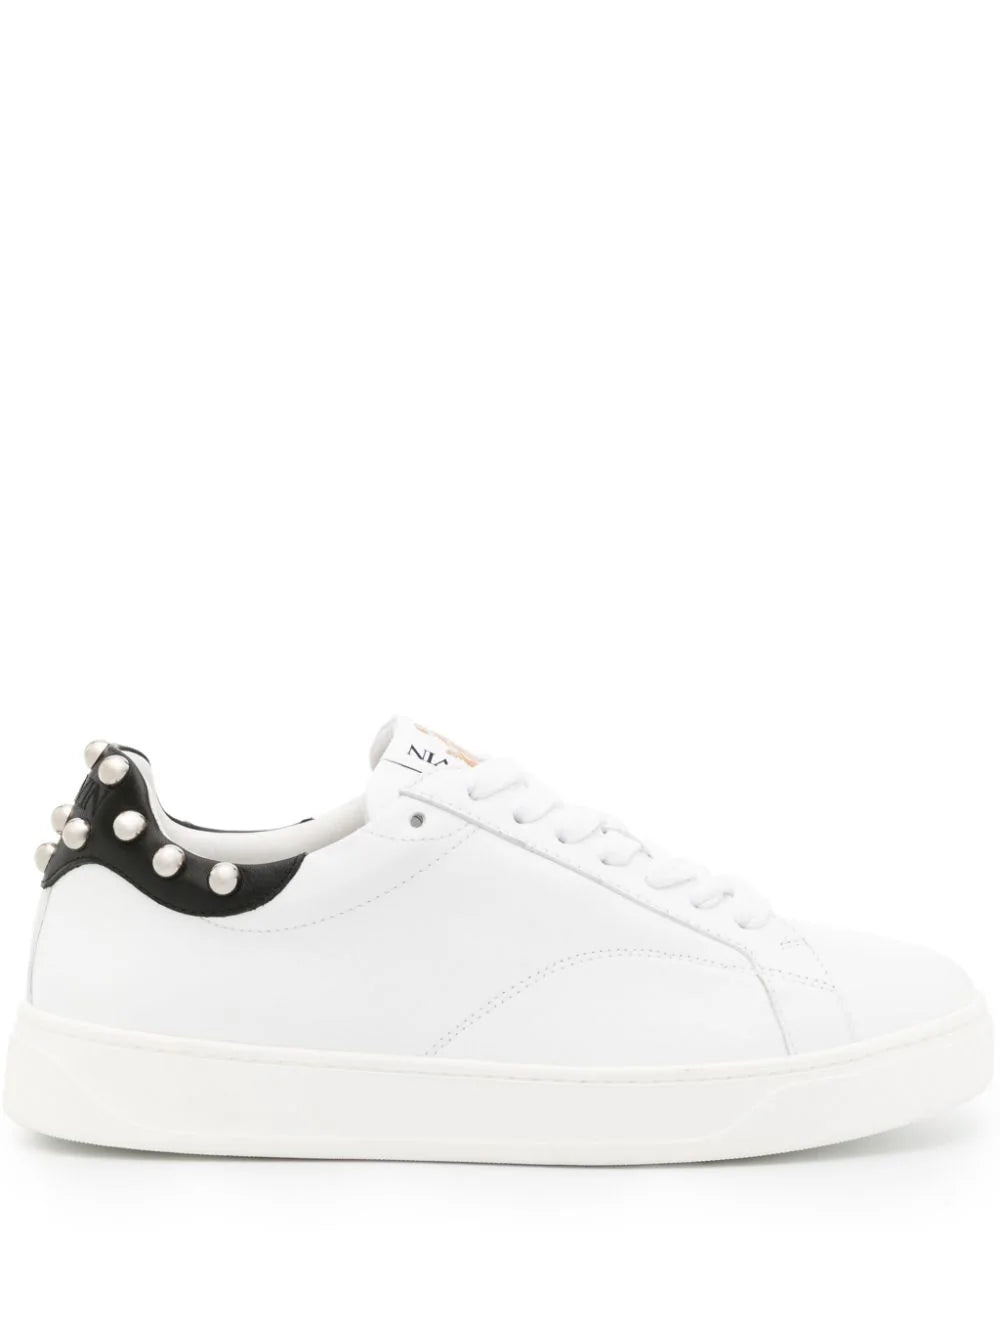 DDBO STUD-EMBELLISHED LEATHER SNEAKERS